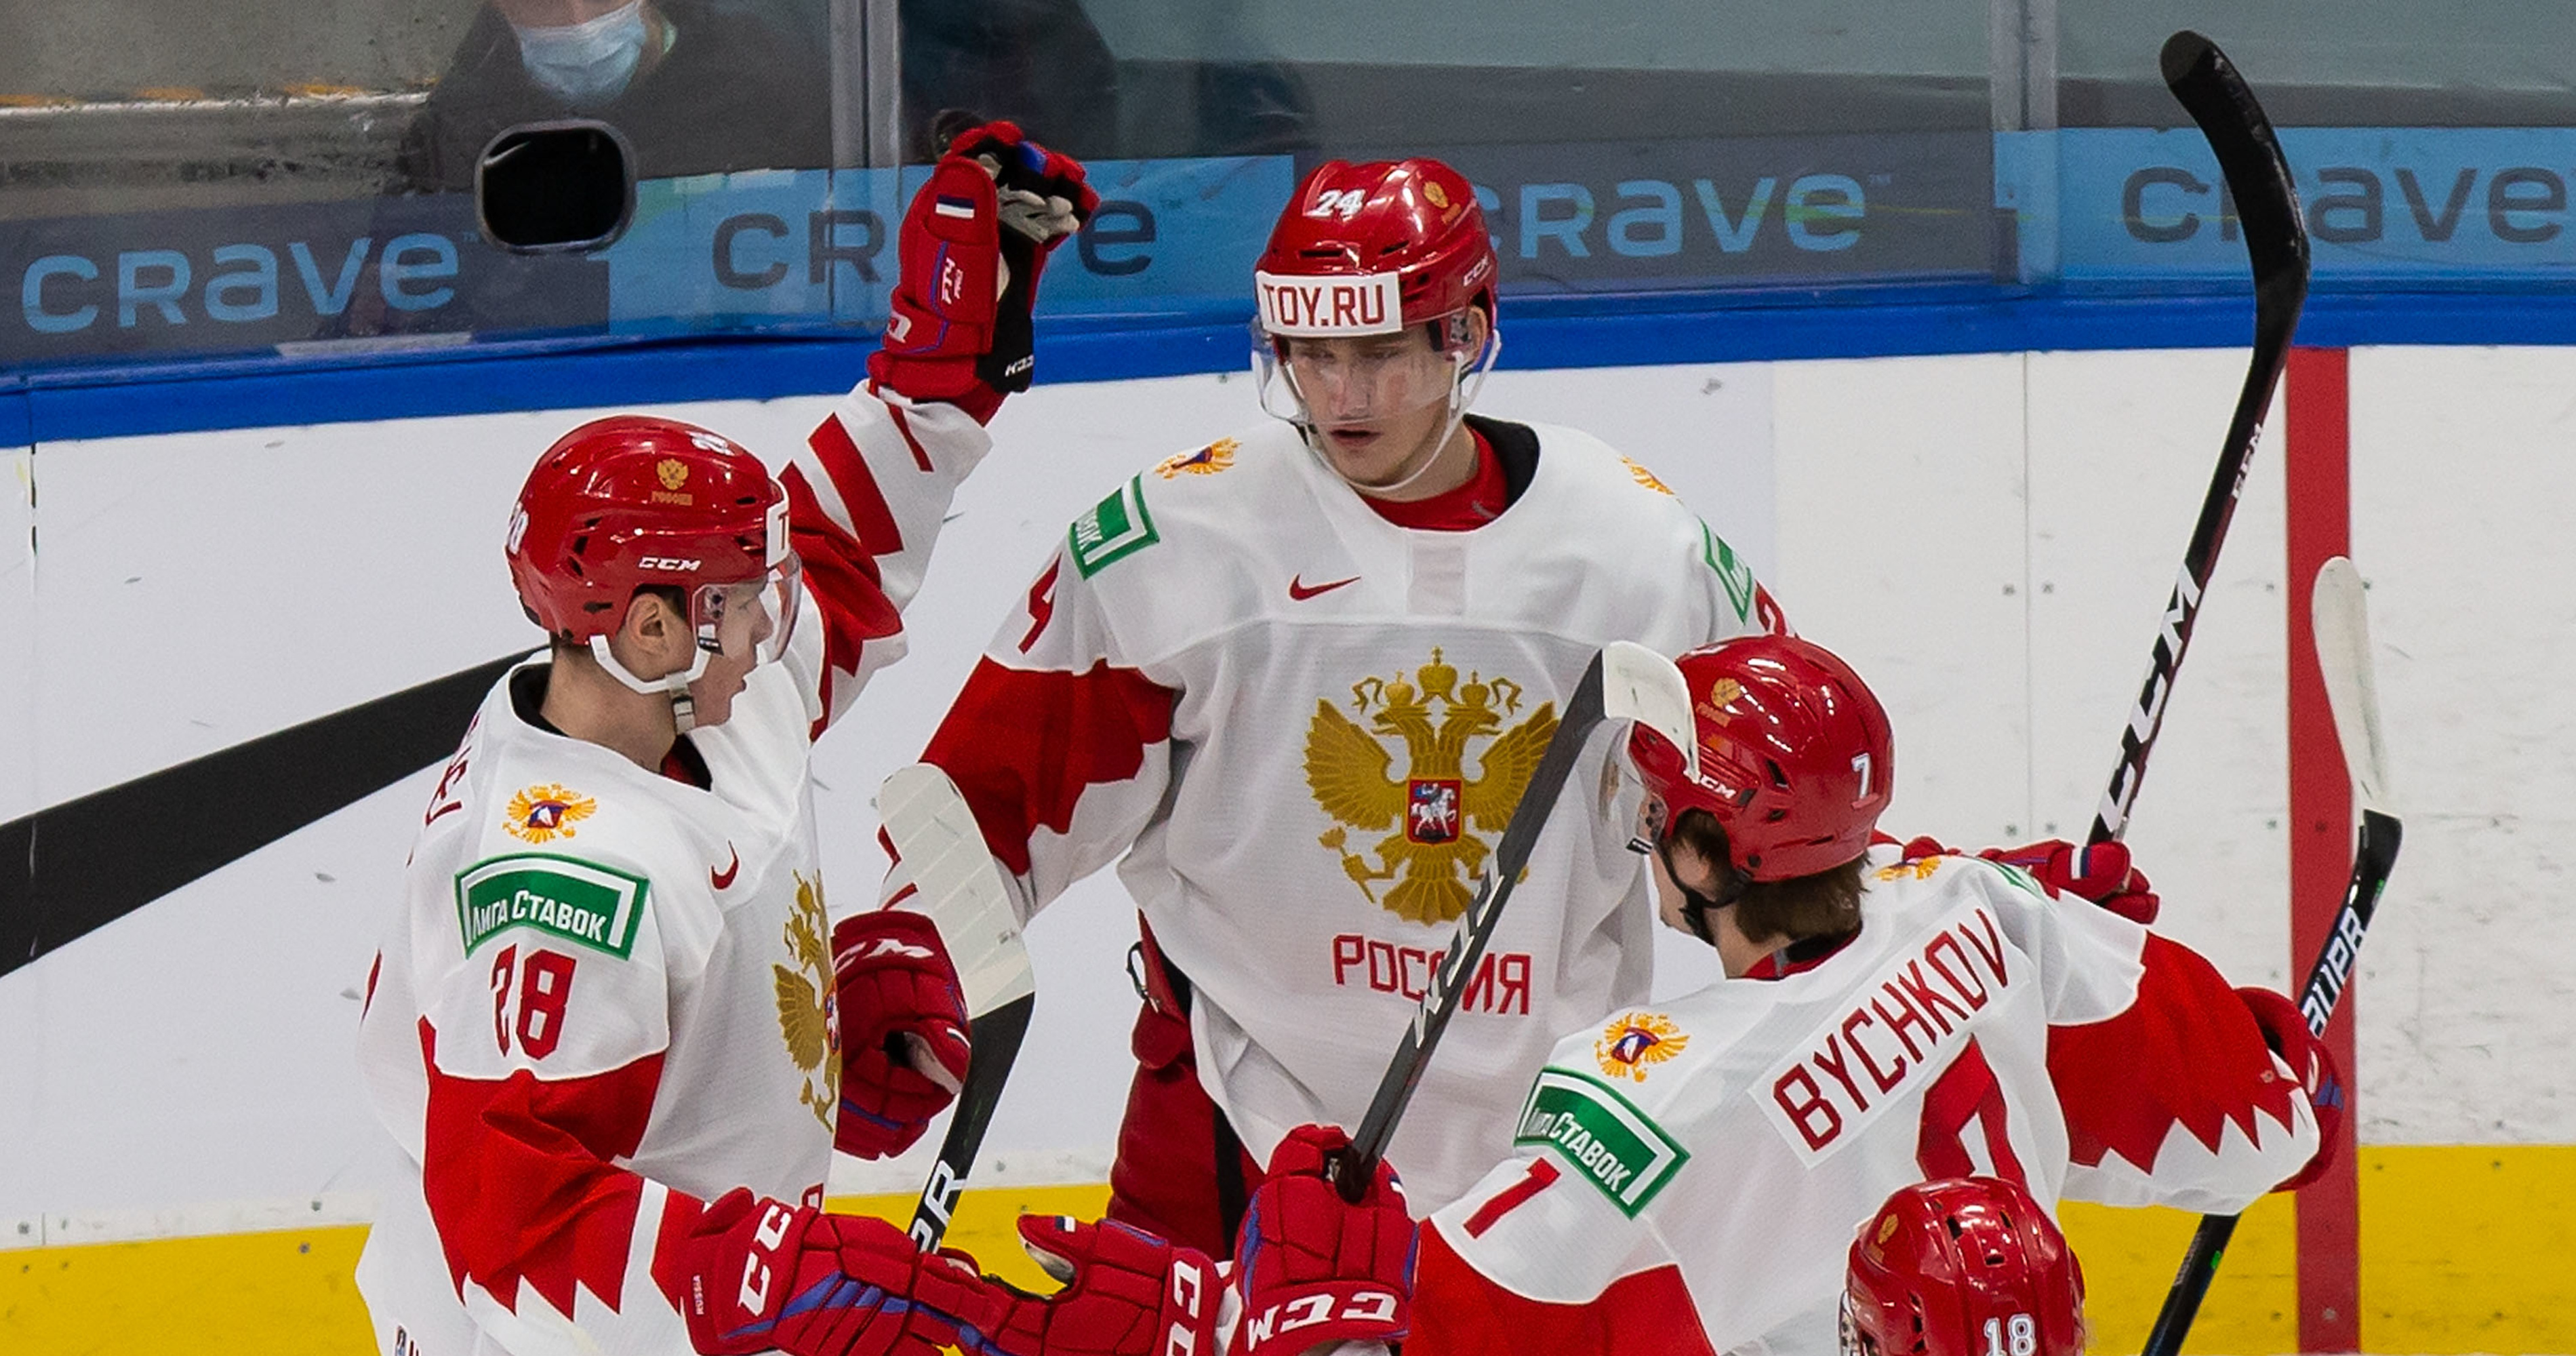 Russian World Junior Hockey Team Kicked off Flight for Not Complying with Mask Policy News, Scores, Highlights, Stats, and Rumors Bleacher Report